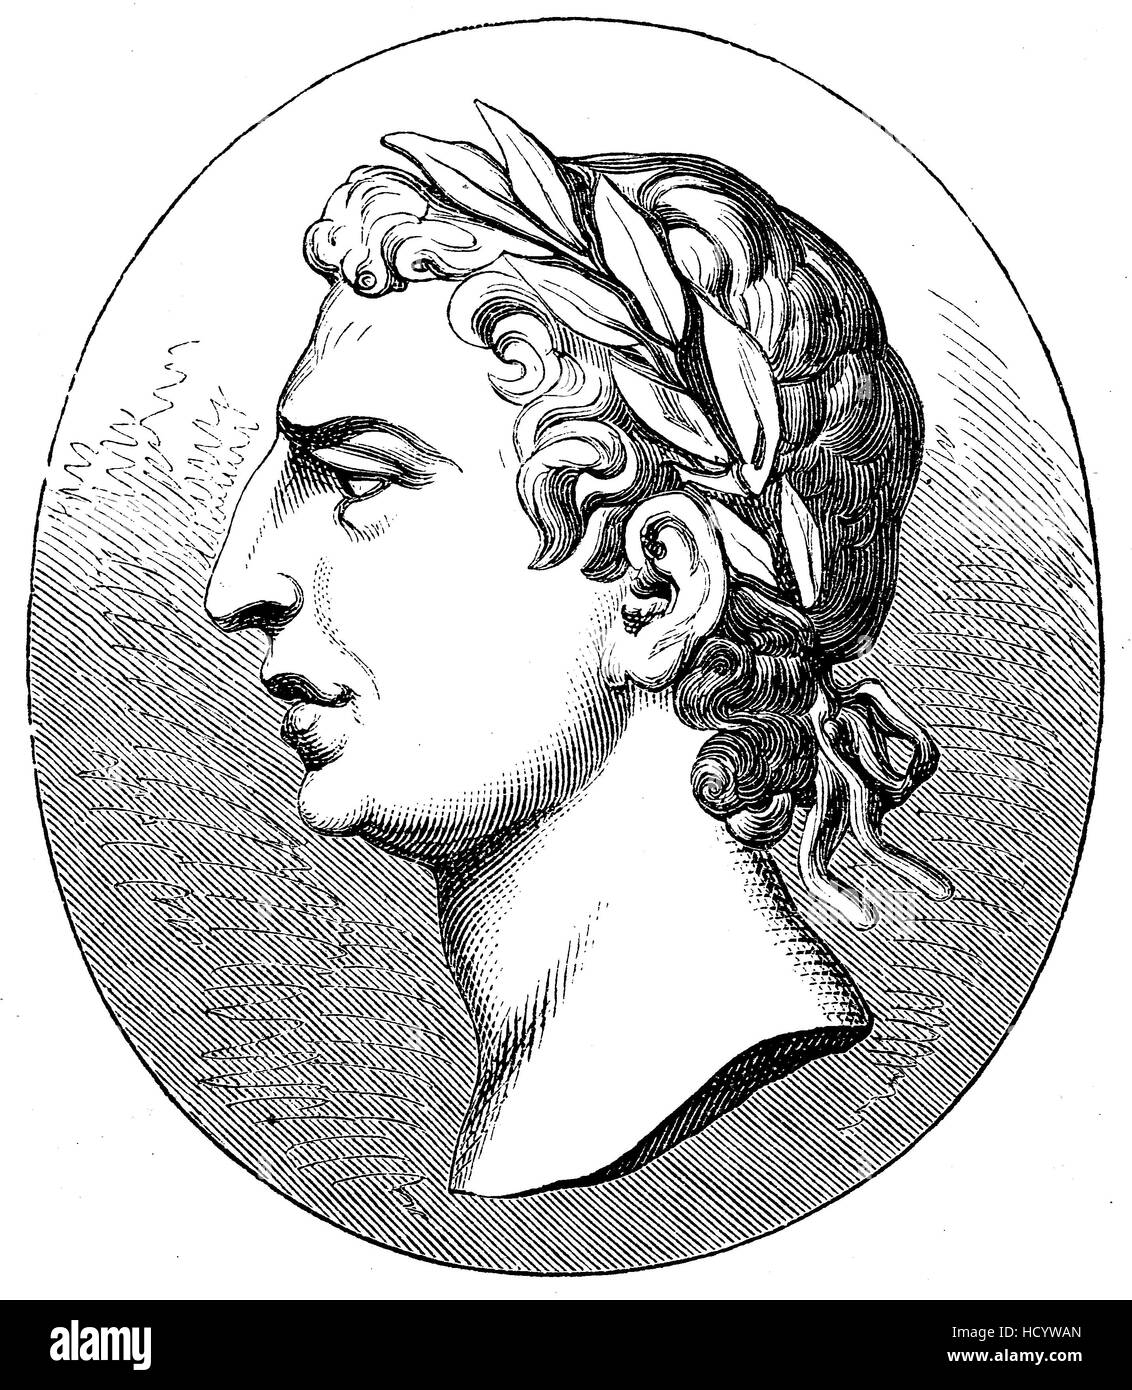 Marcus Porcius Cato Uticensis, 95 BC - 46 BC, Cato the Younger, a politician and statesman in the late Roman Republic, the story of the ancient Rome, roman Empire, Italy Stock Photo